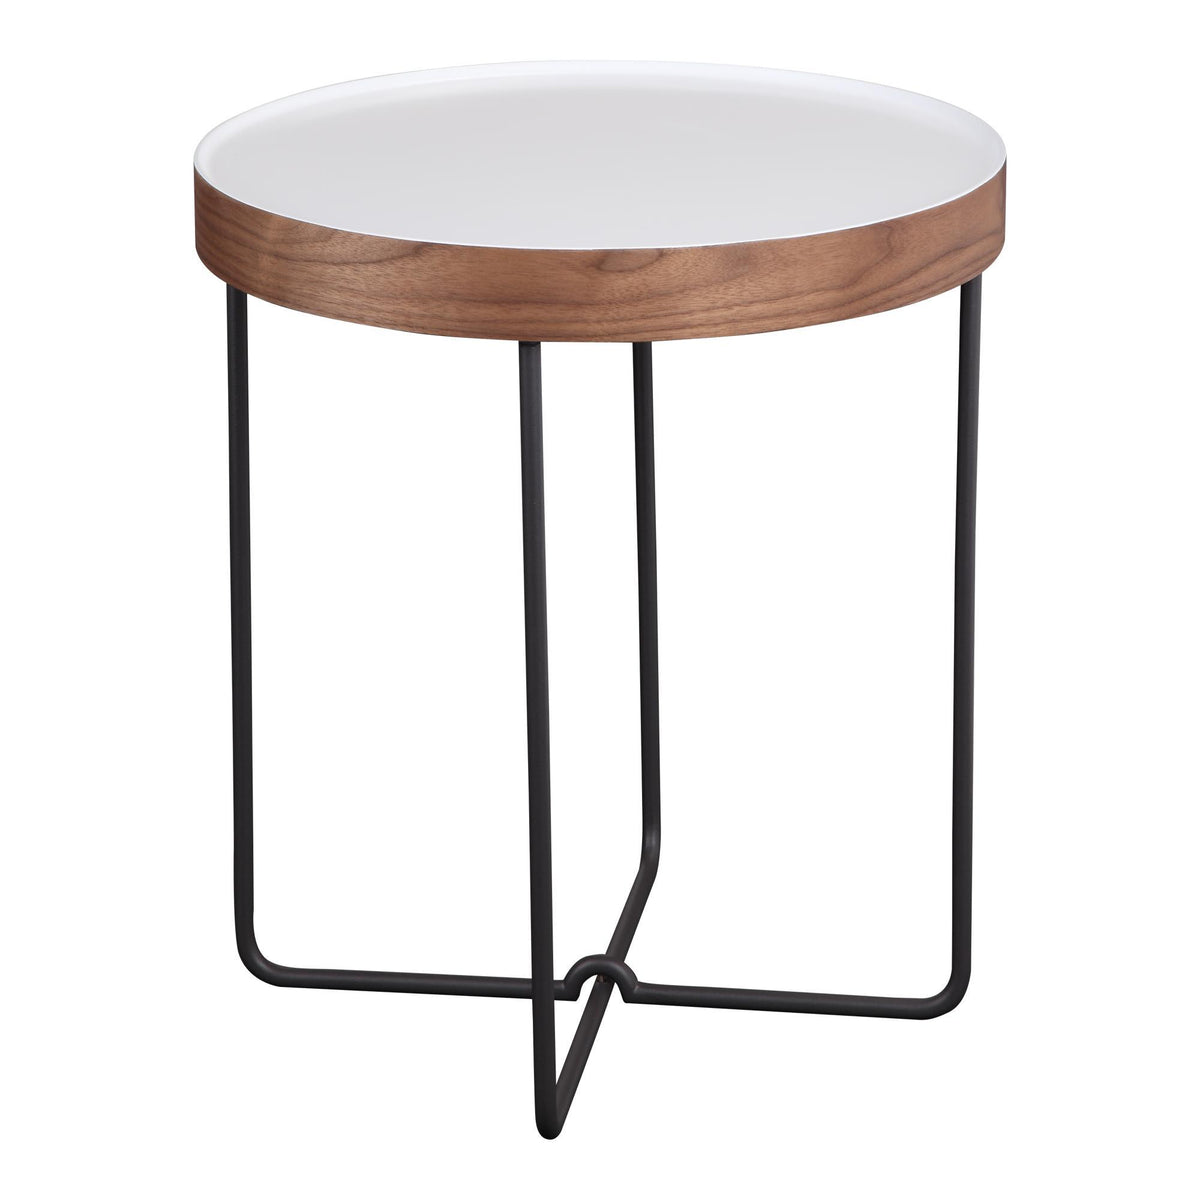 Moe's Home Collection Lenor Side Table - PX-1003-18